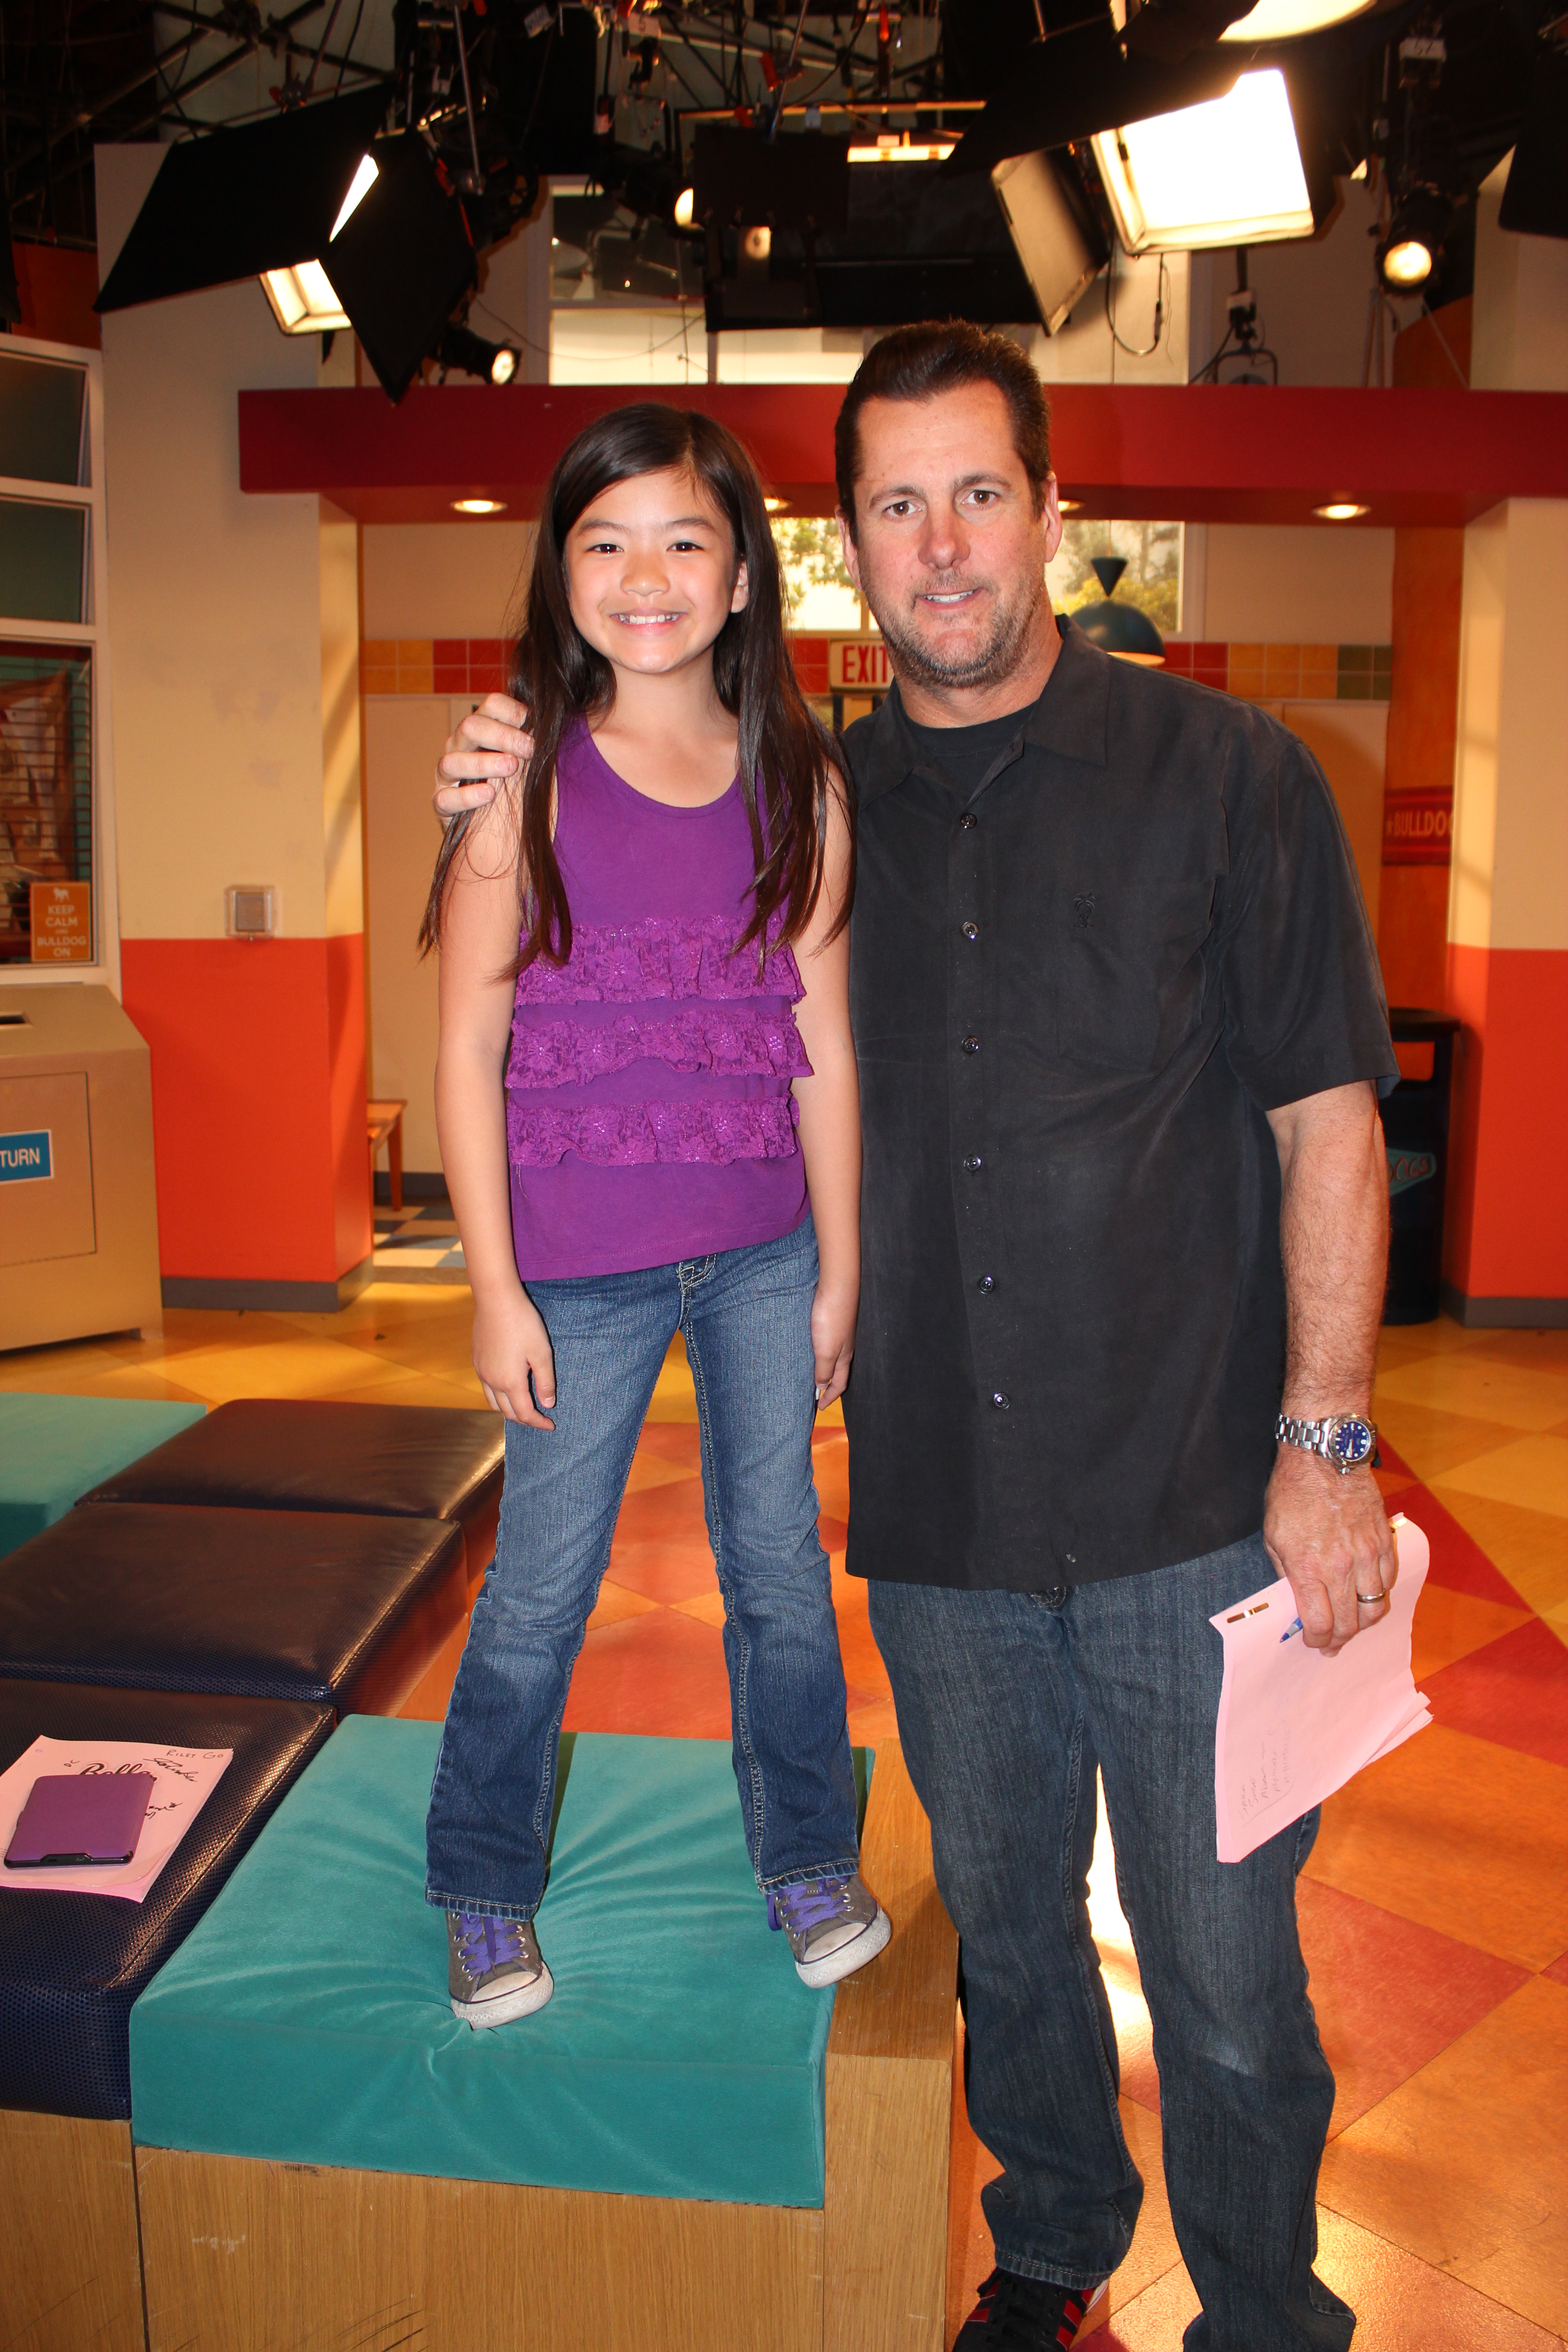 Riley Go and Director Sean Lambert, on the set of Nickelodeon's Bella and the Bulldogs.